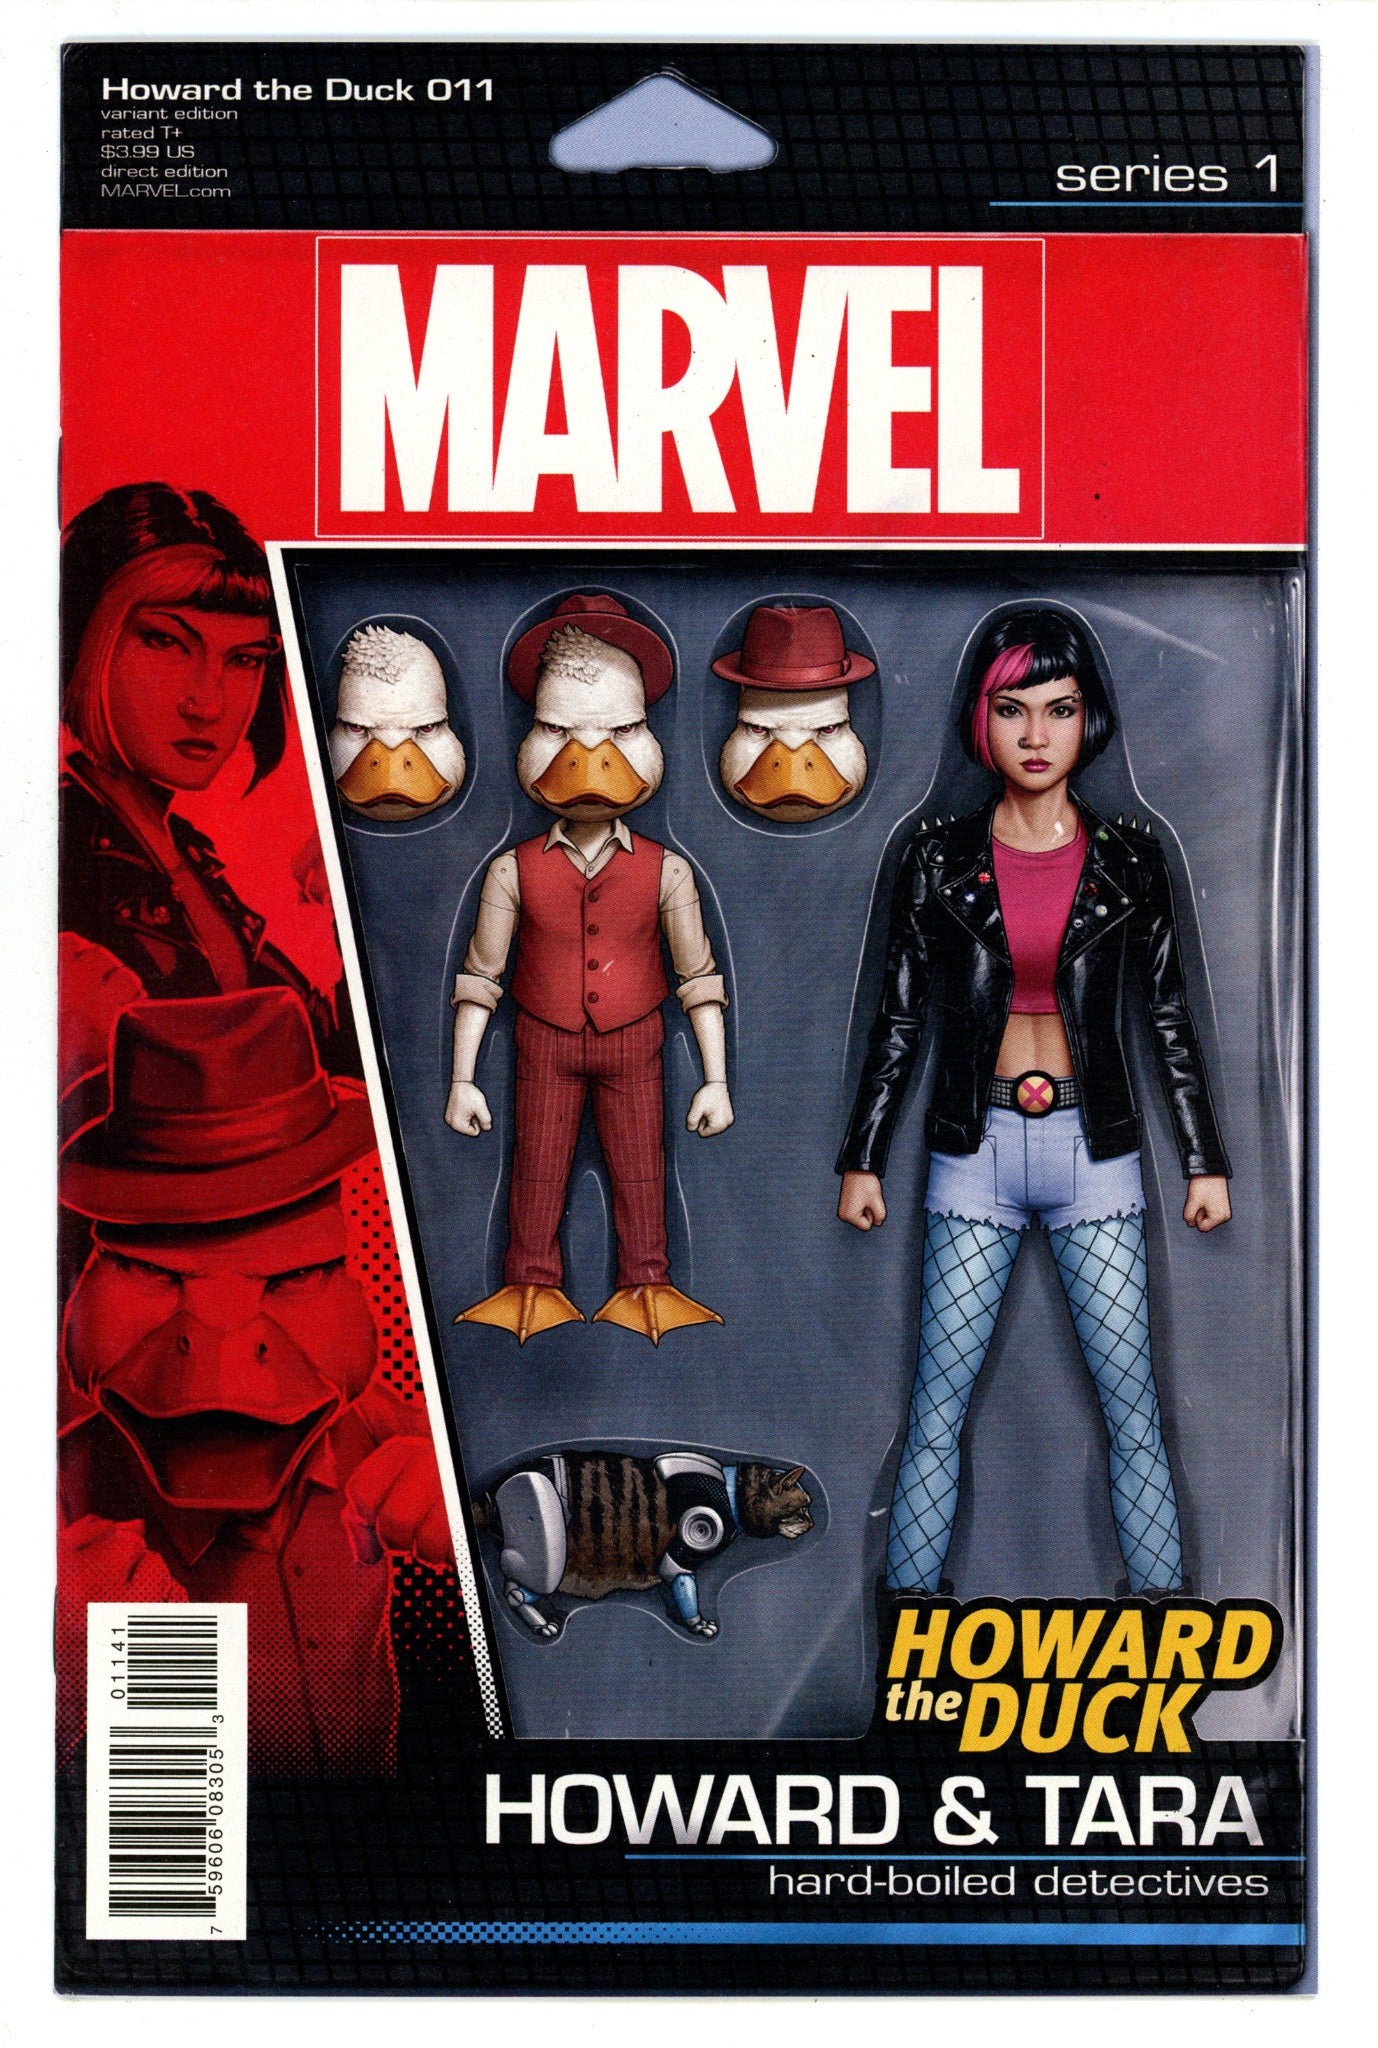 Howard the Duck Vol 5 11 NM- (9.2) (2016) Christopher Action Figure Variant 